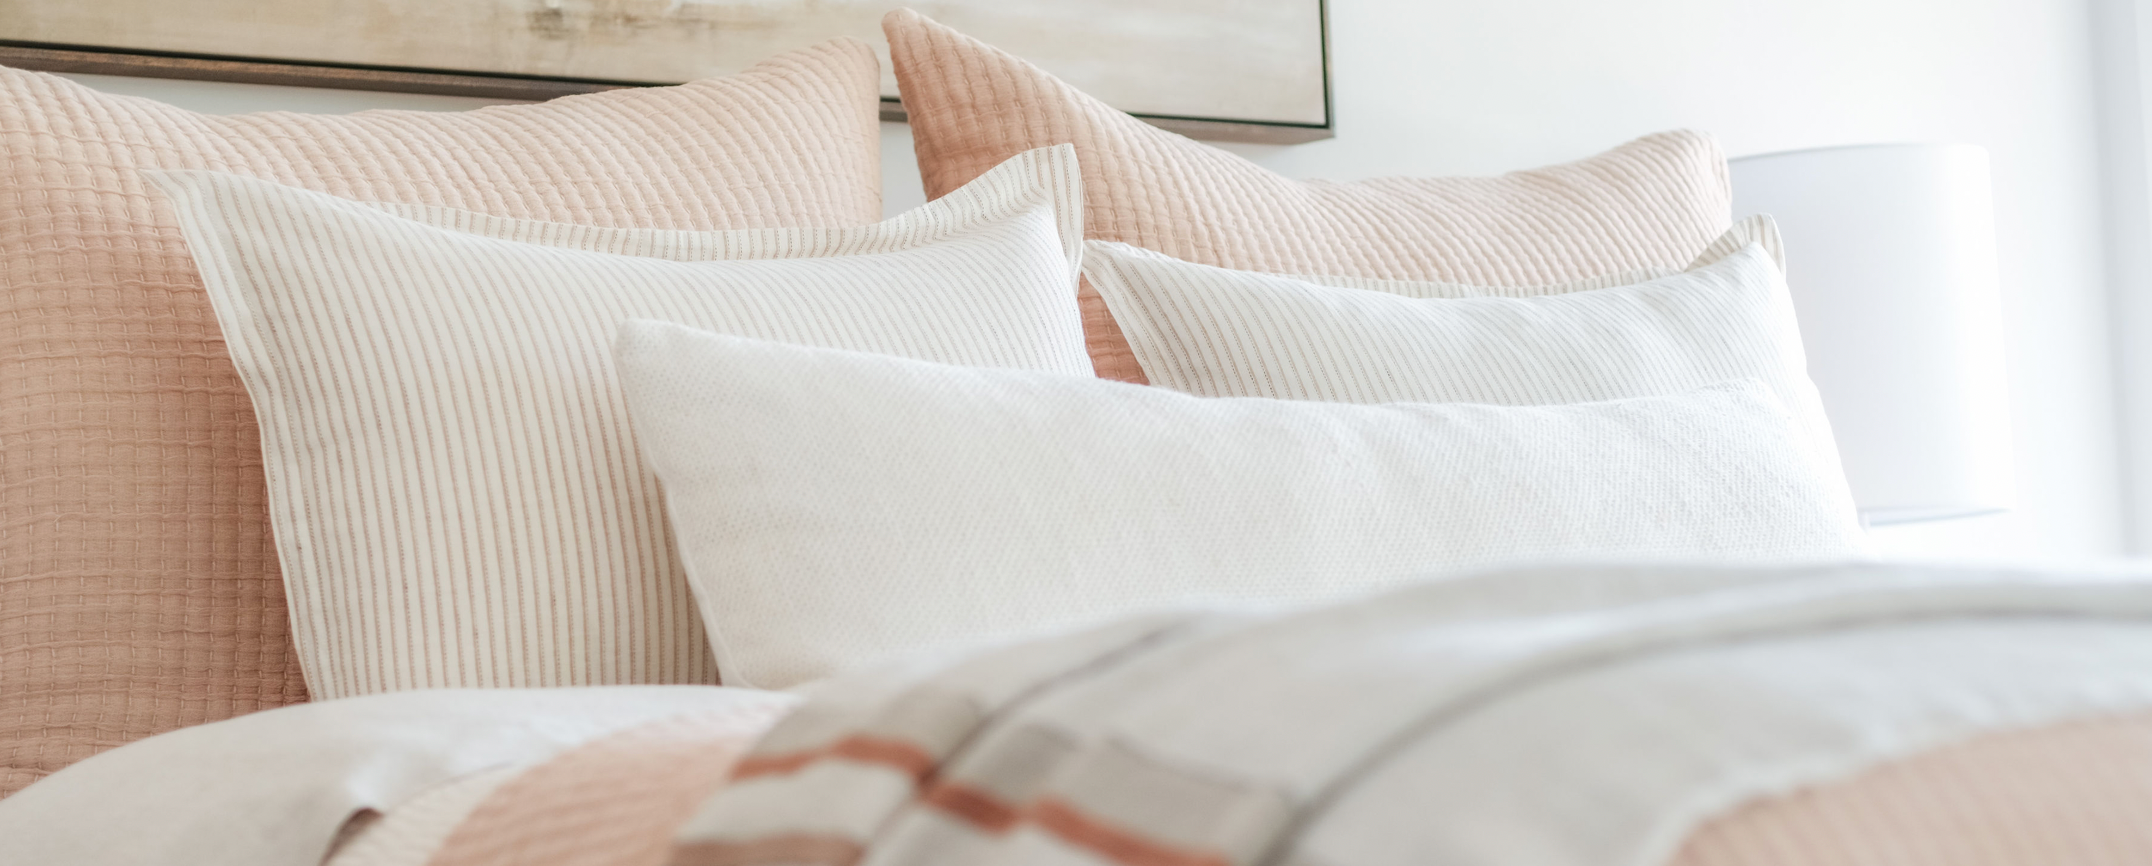 The Impact of Quality Bedding on Your Sleep: A Guide to Inserts.